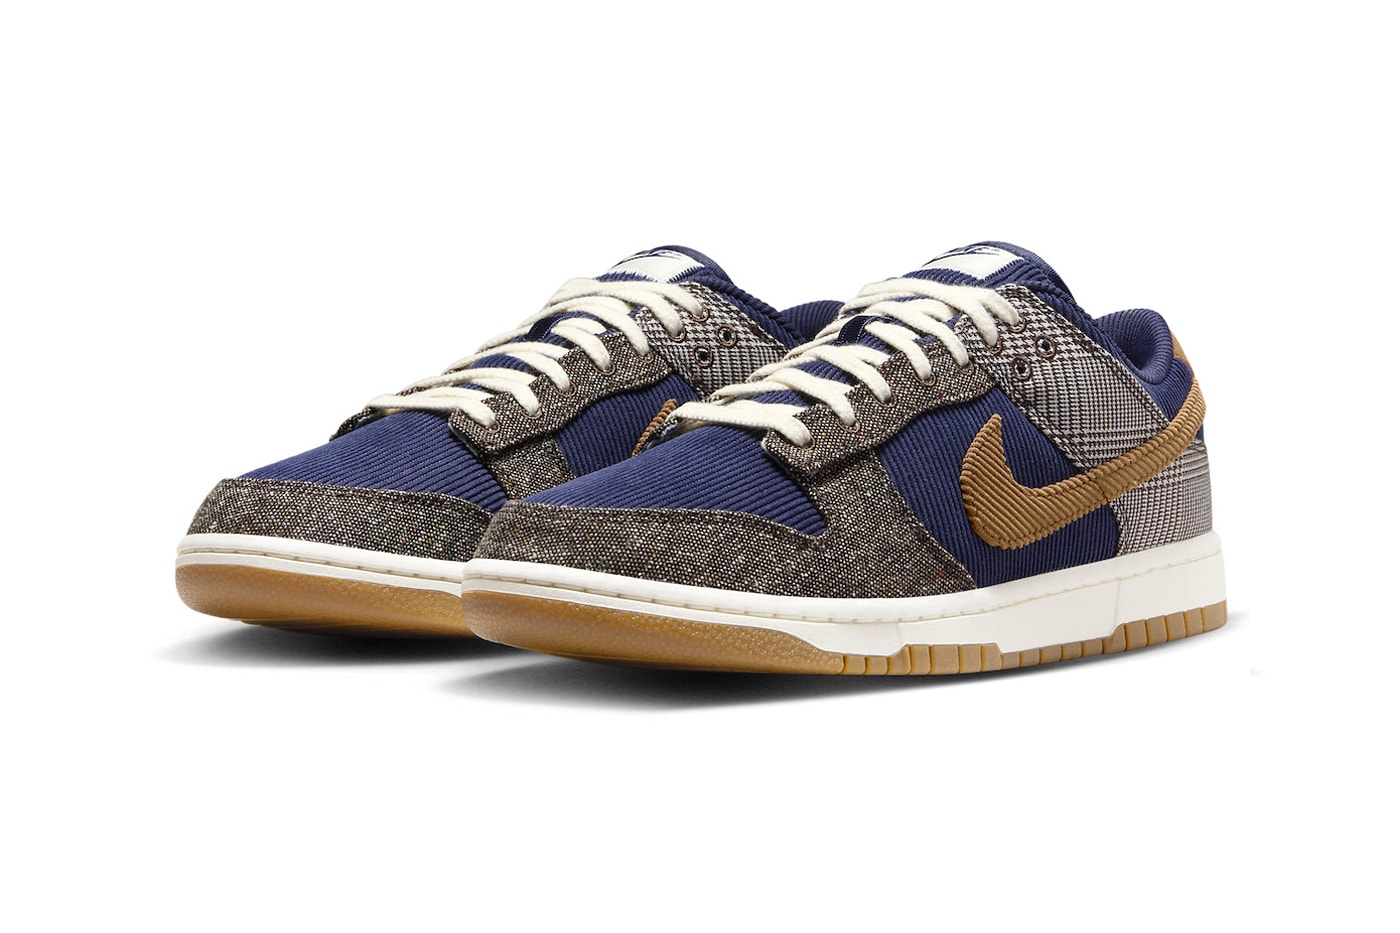 Official Look at Nike Dunk Low "Midnight Navy/Ale Brown" FQ8746-410 Midnight Navy/Ale Brown-Pale Ivory release info